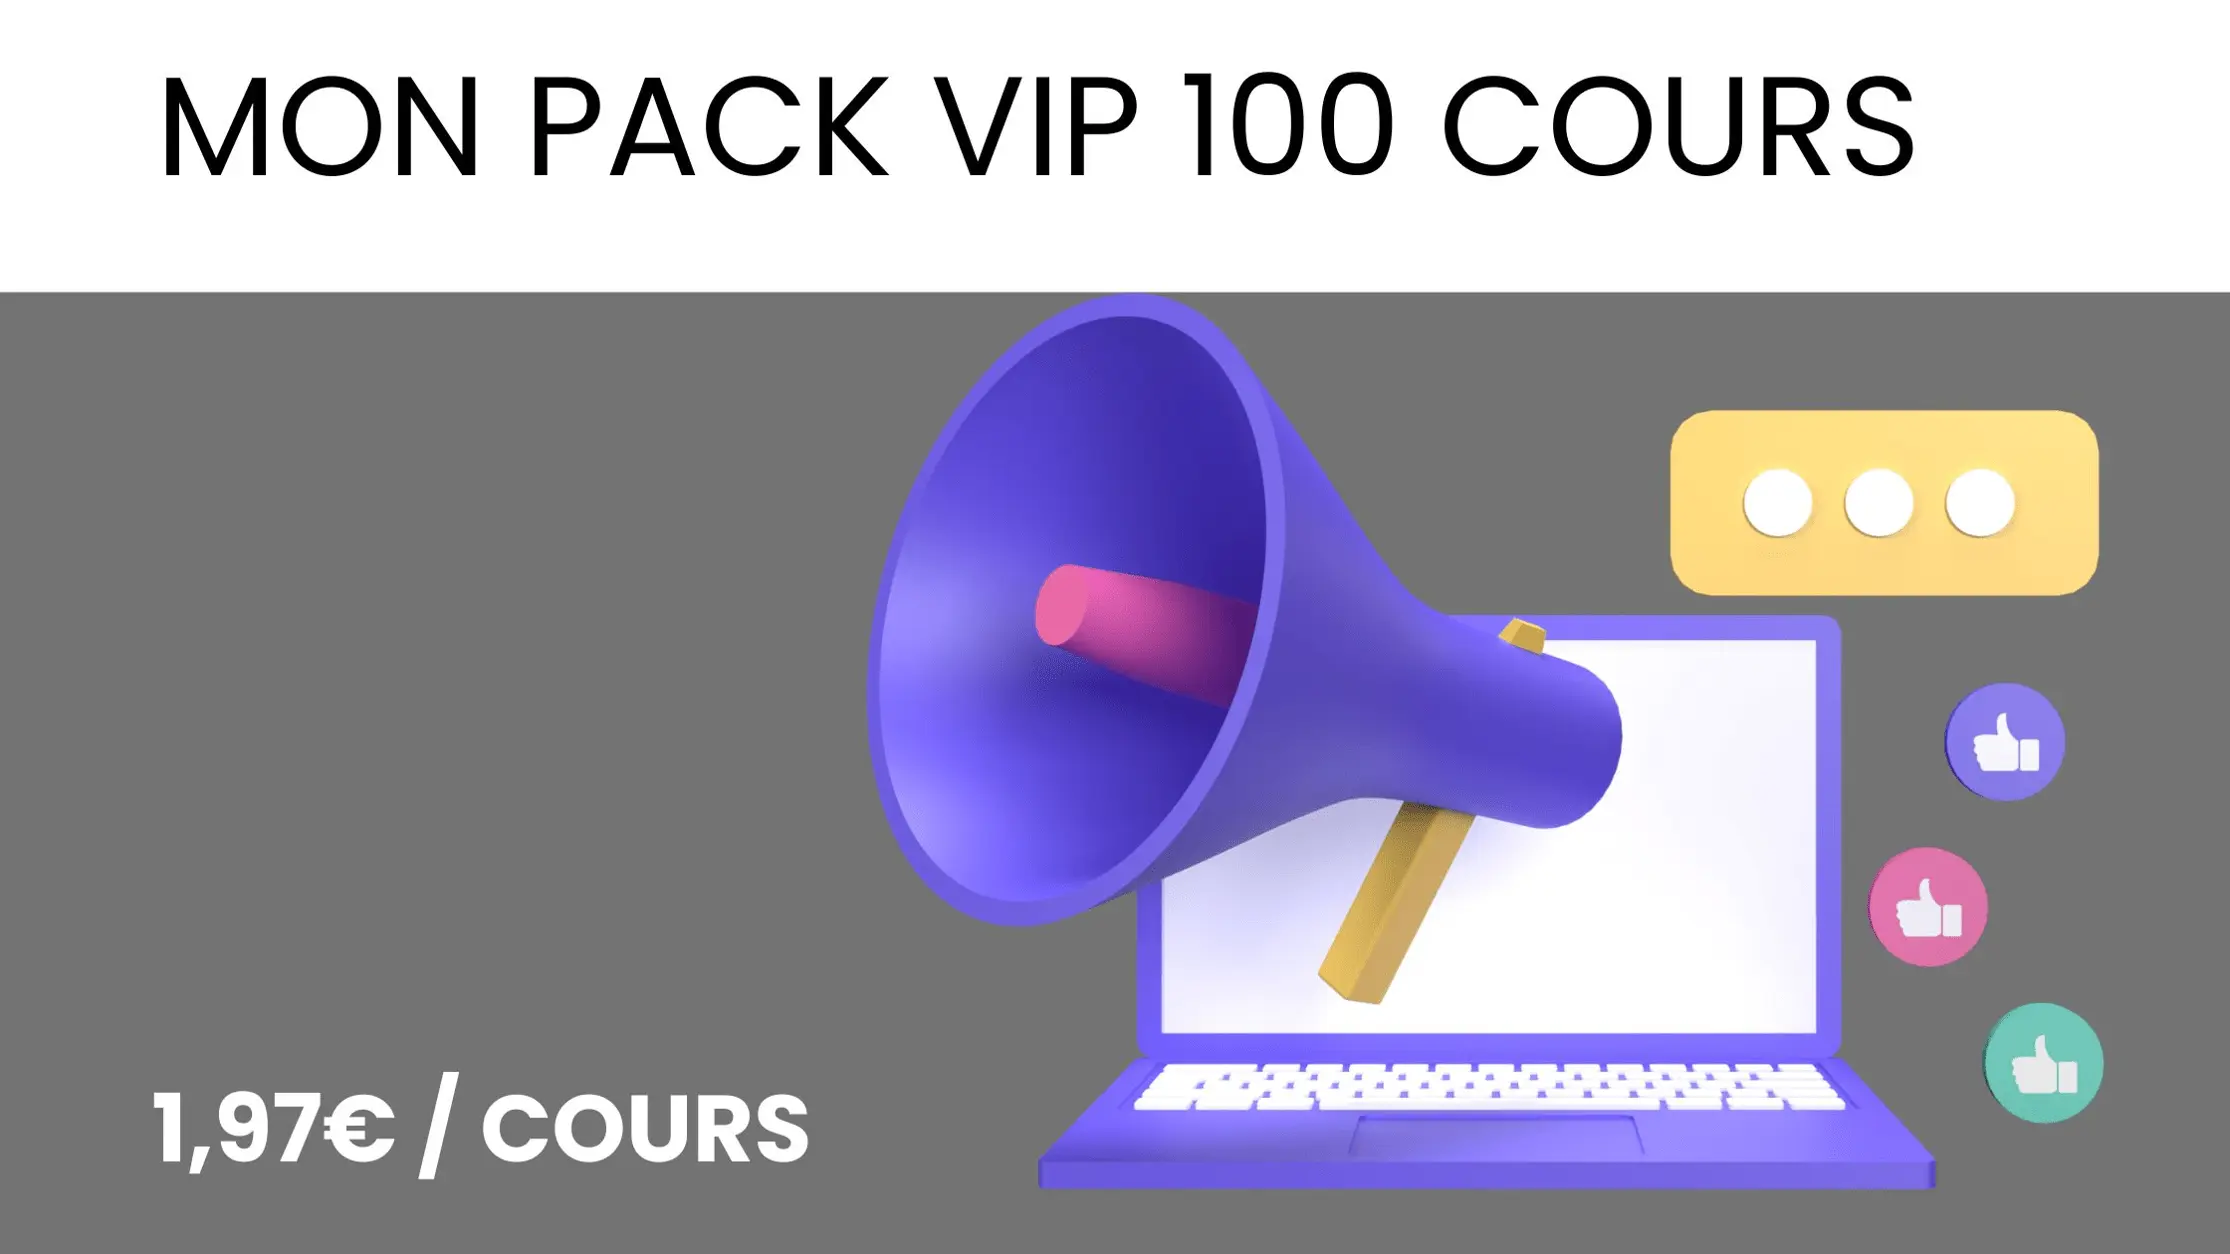 Prendre le pack vip 100 cours